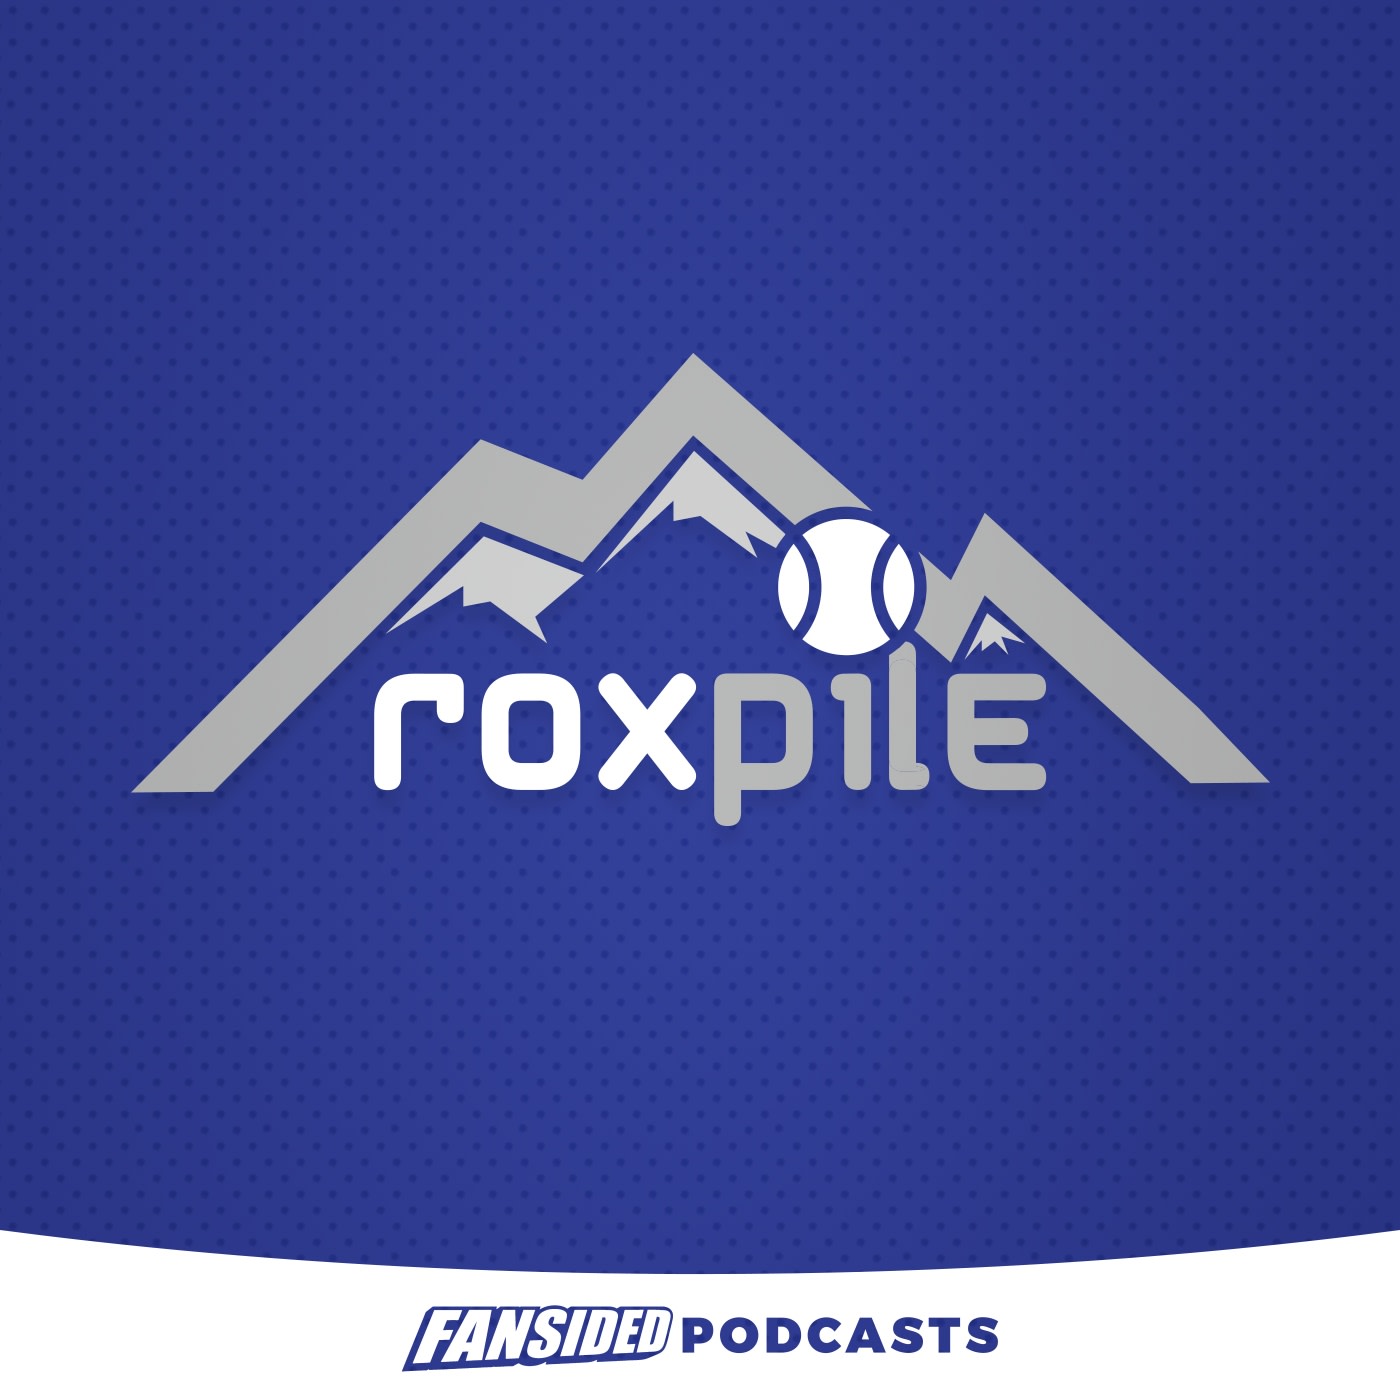 Episode 40: Roster talk, the importance of 2021, and a look at the Rockies schedule to start the season